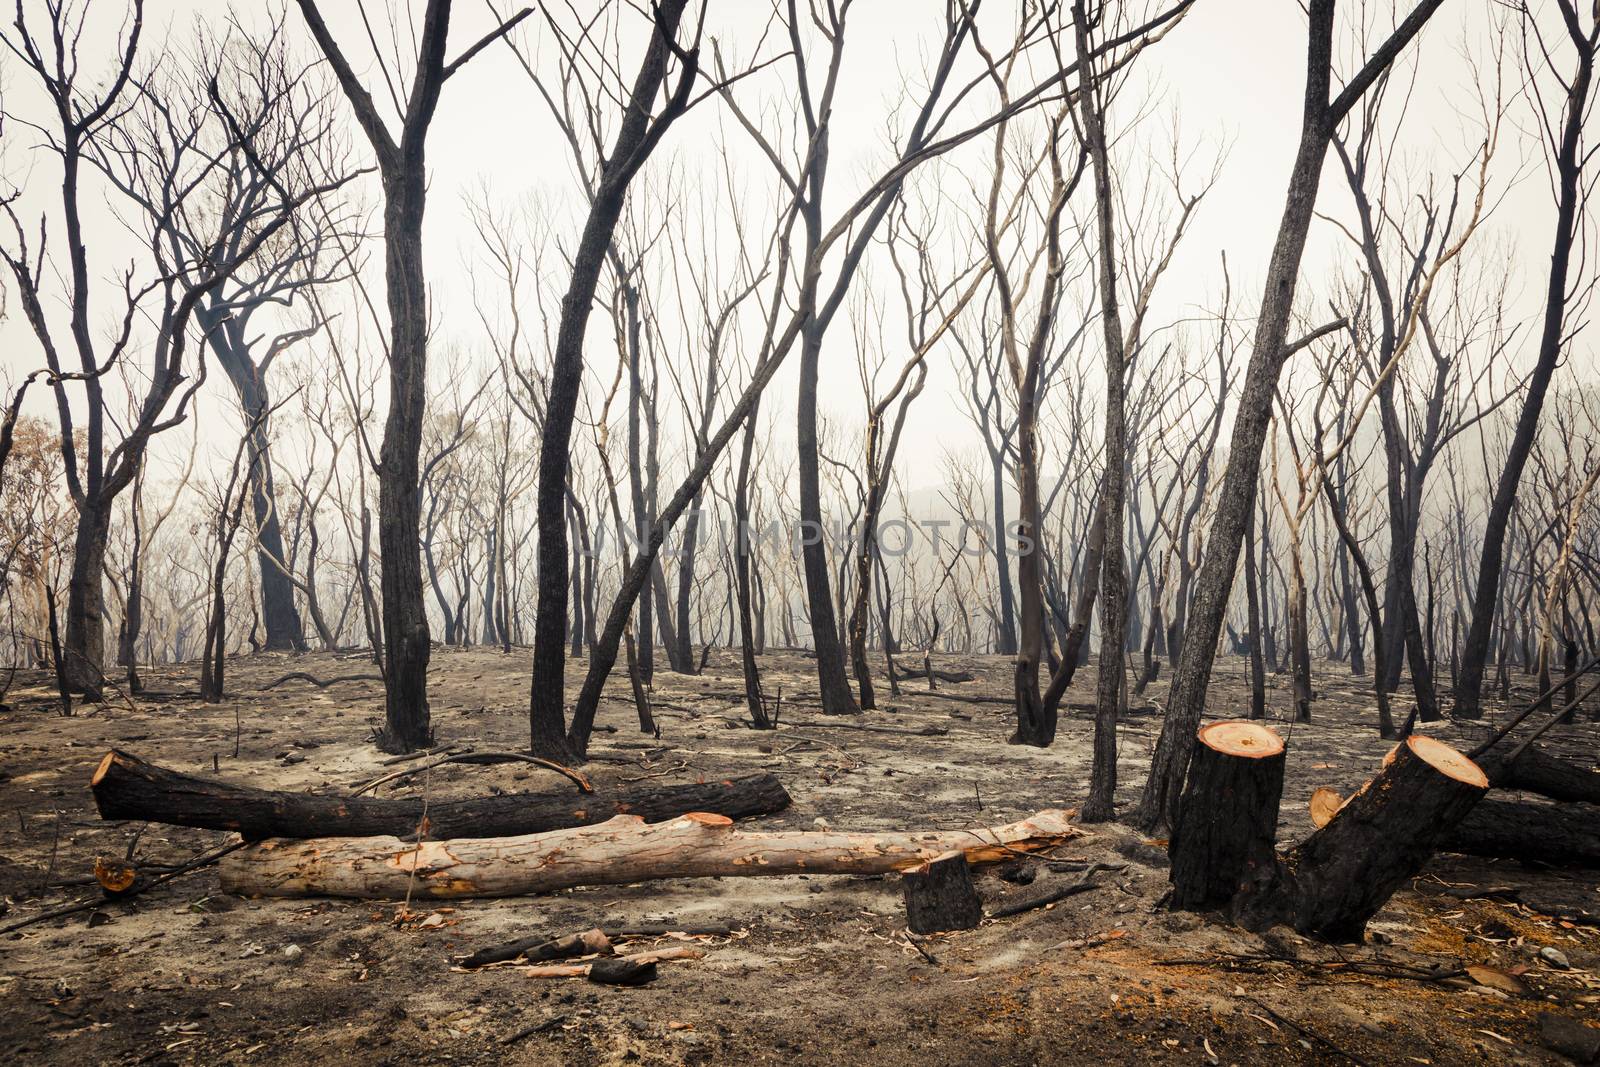 Gum Trees burnt by bushfire in The Blue Mountains in Australia by WittkePhotos